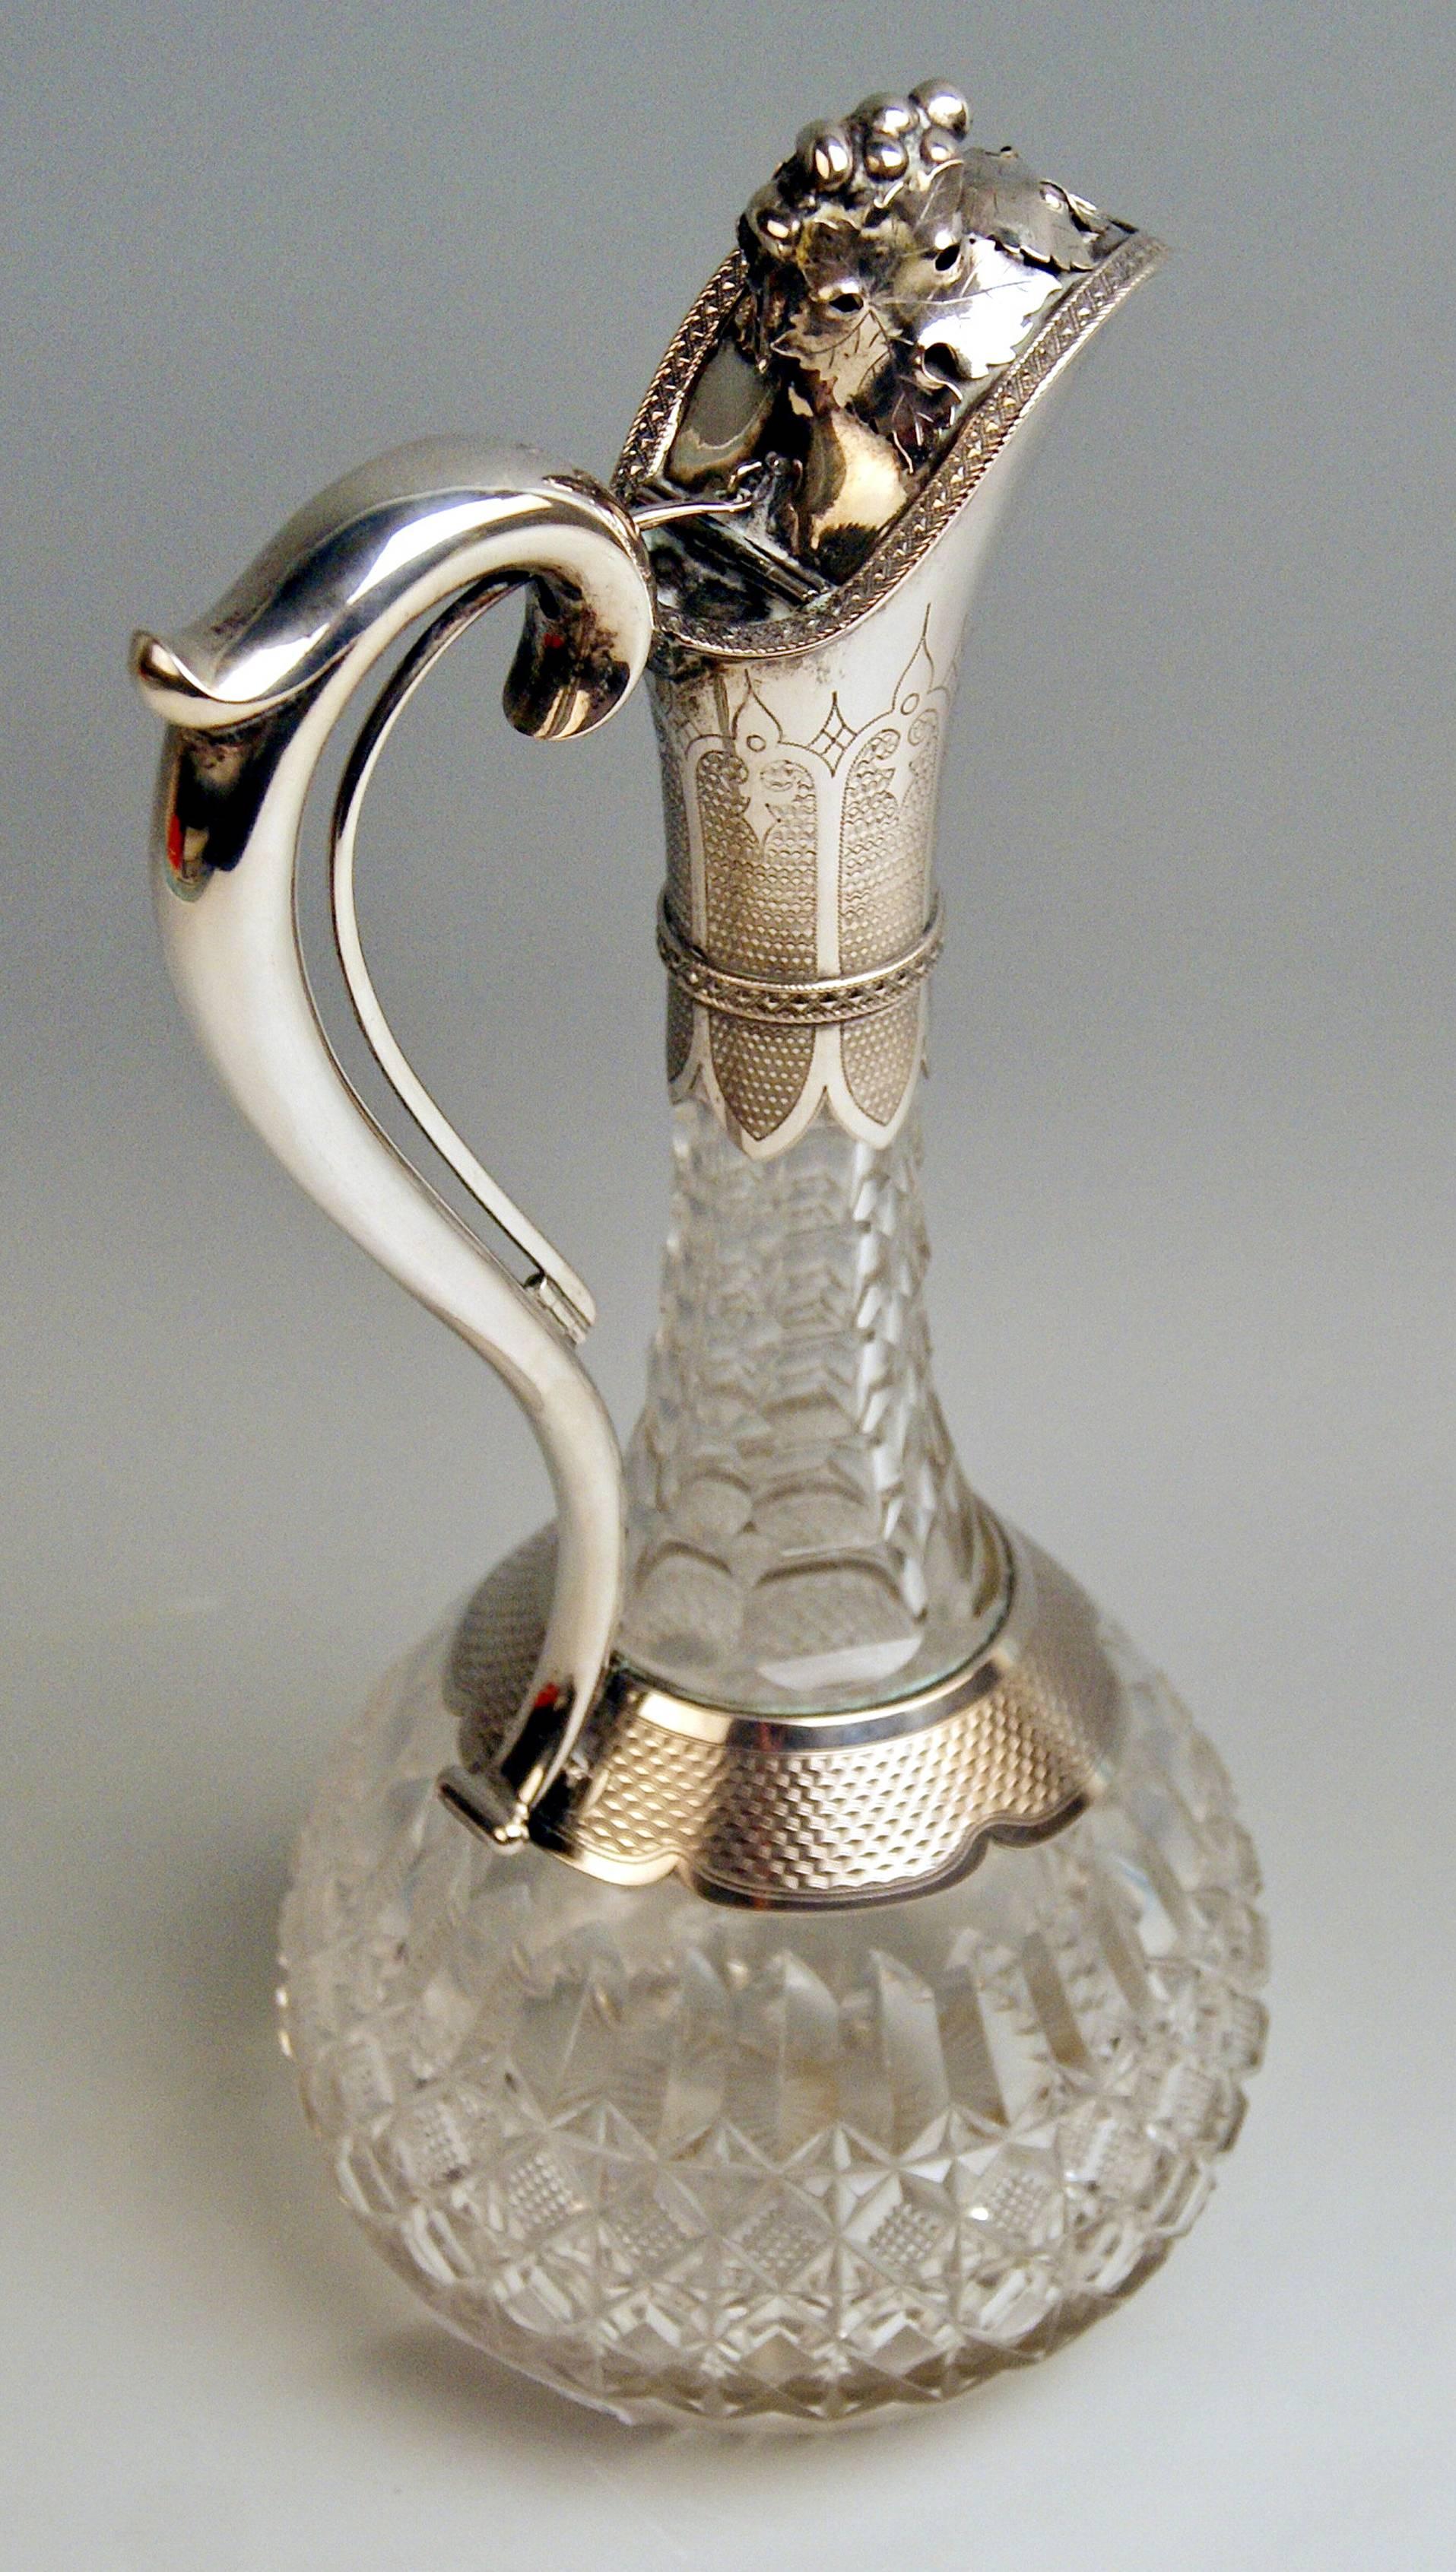 Glass decanter (wine carafe) with silver mountings
Art Nouveau
Hallmarked:
-- SILVER 800 MARK = SHAPED AS TOWER (= as it was used in POLAND or HUNGARY)
-- master's mark existing: BG (?) / a bit rubbed

made circa 1900 

Specifications:
The